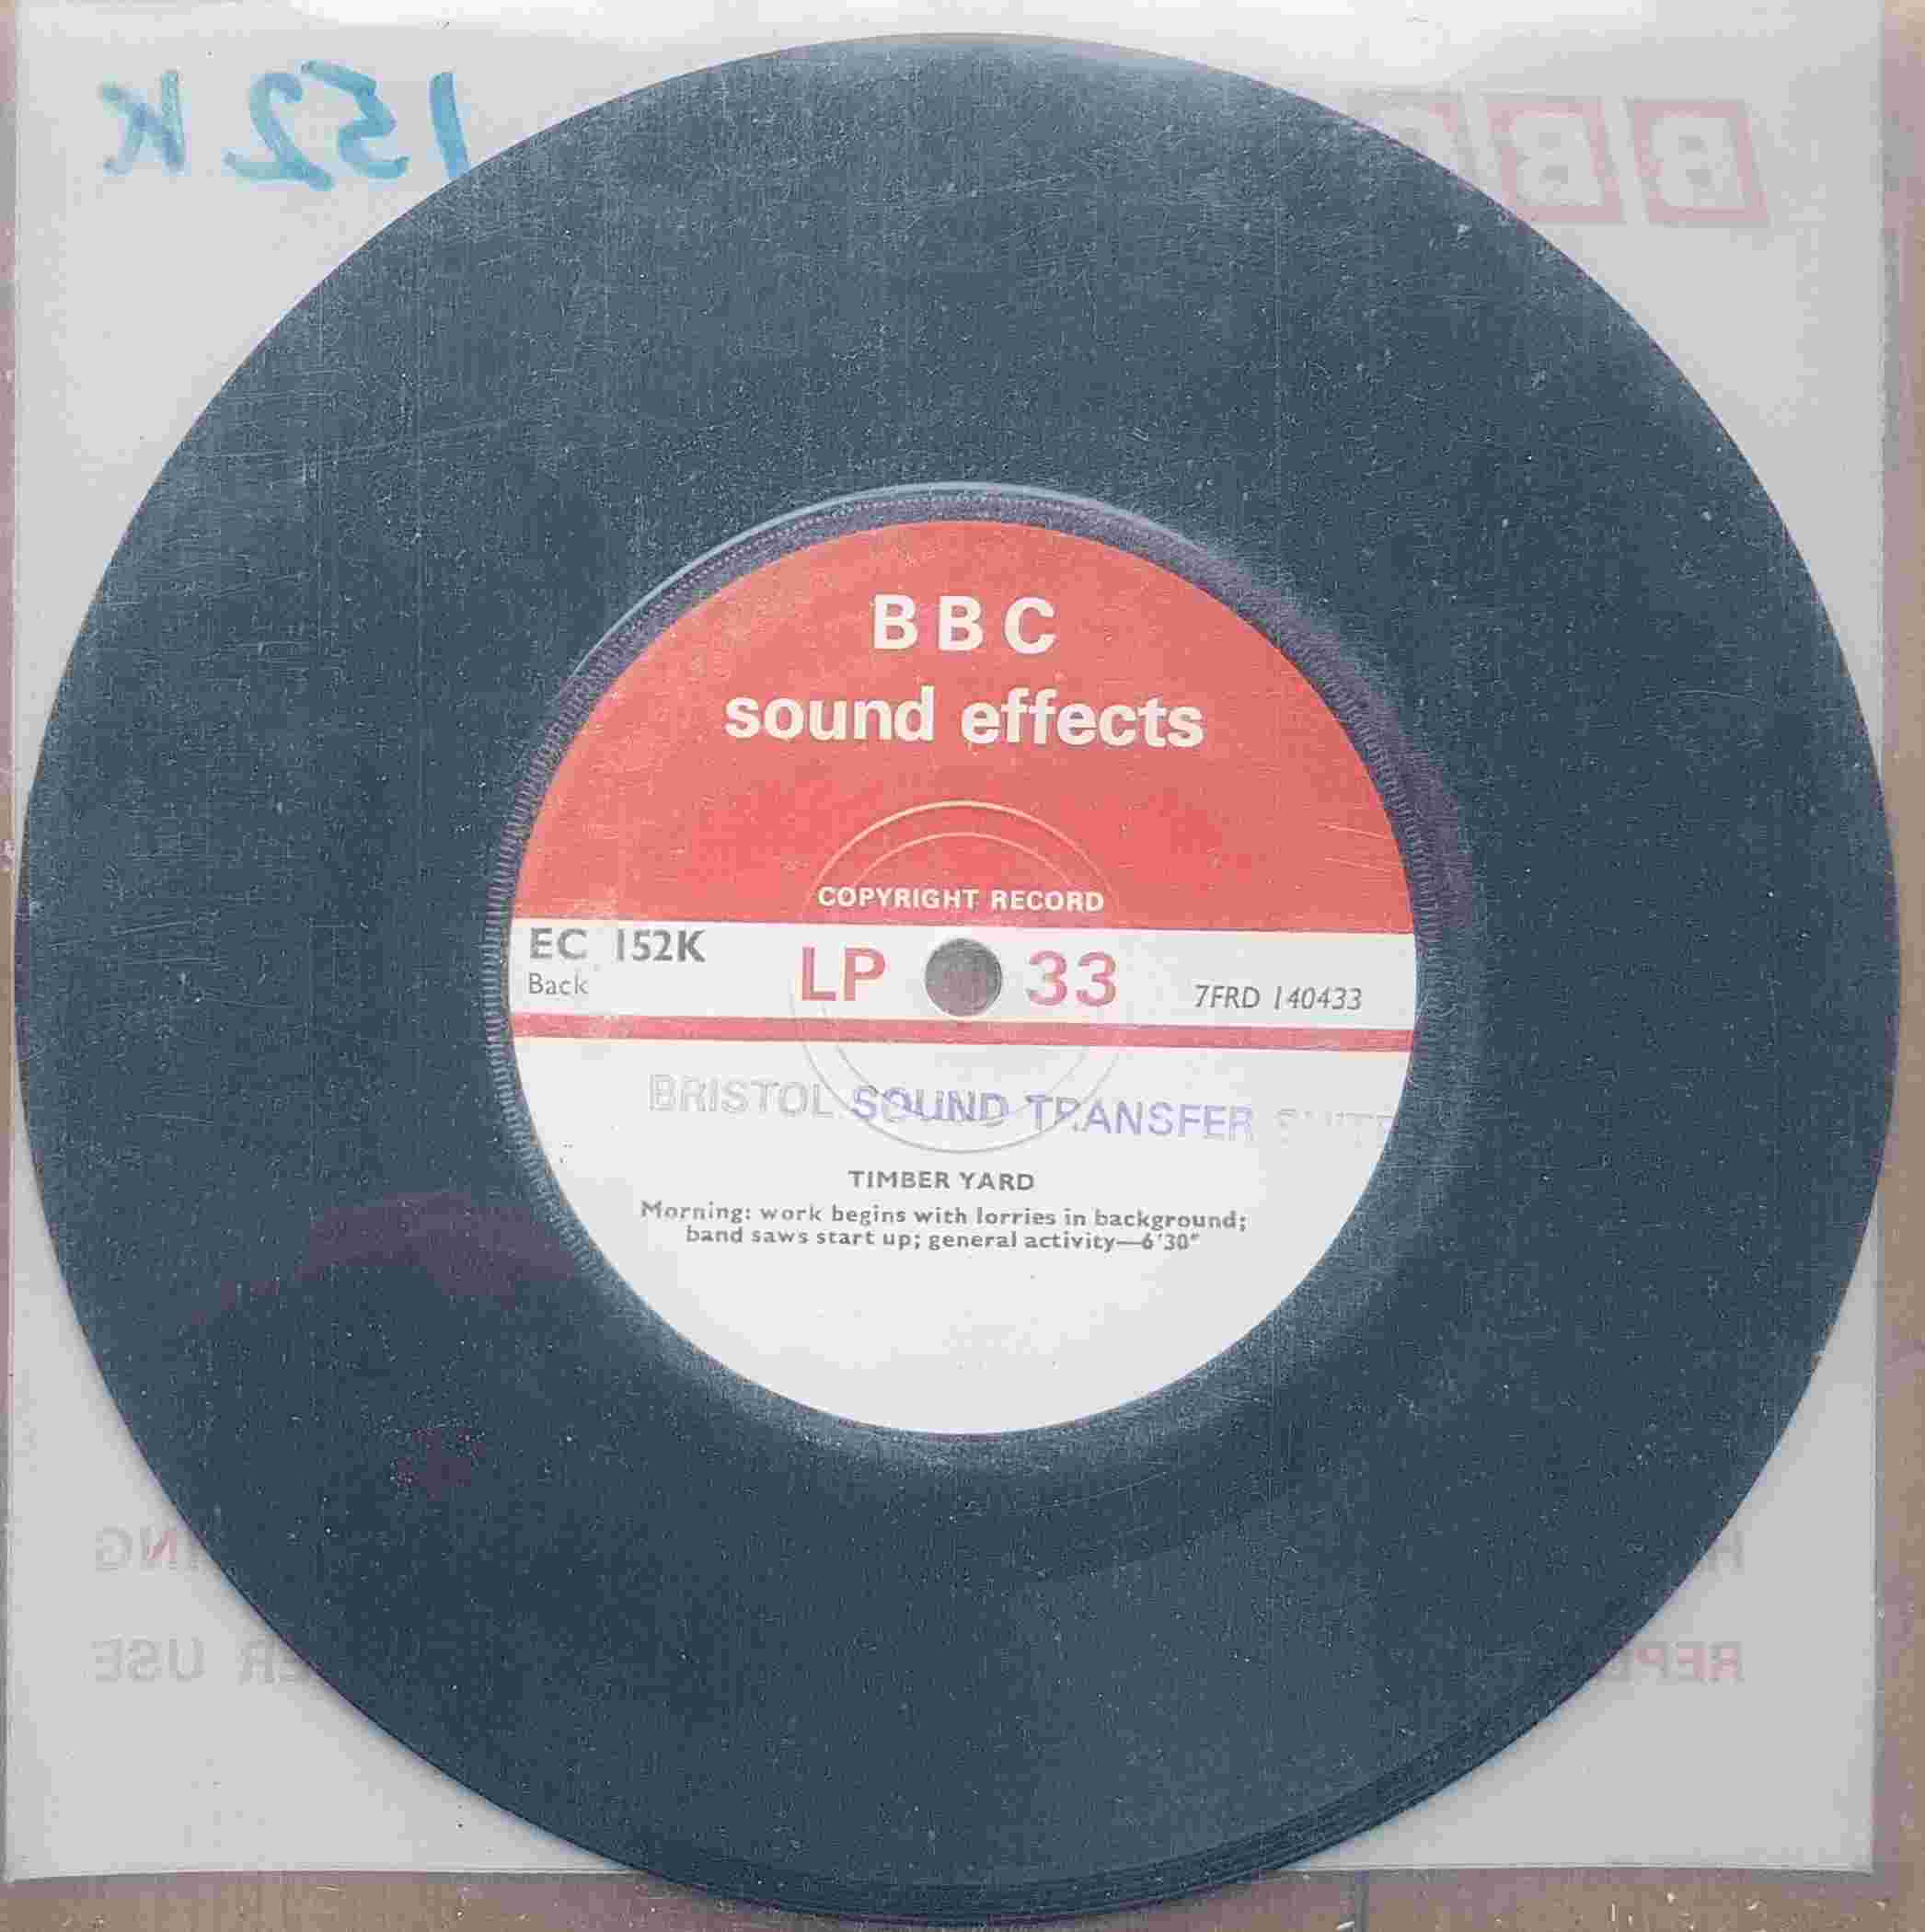 Picture of EC 152K Timber yard by artist Not registered from the BBC records and Tapes library